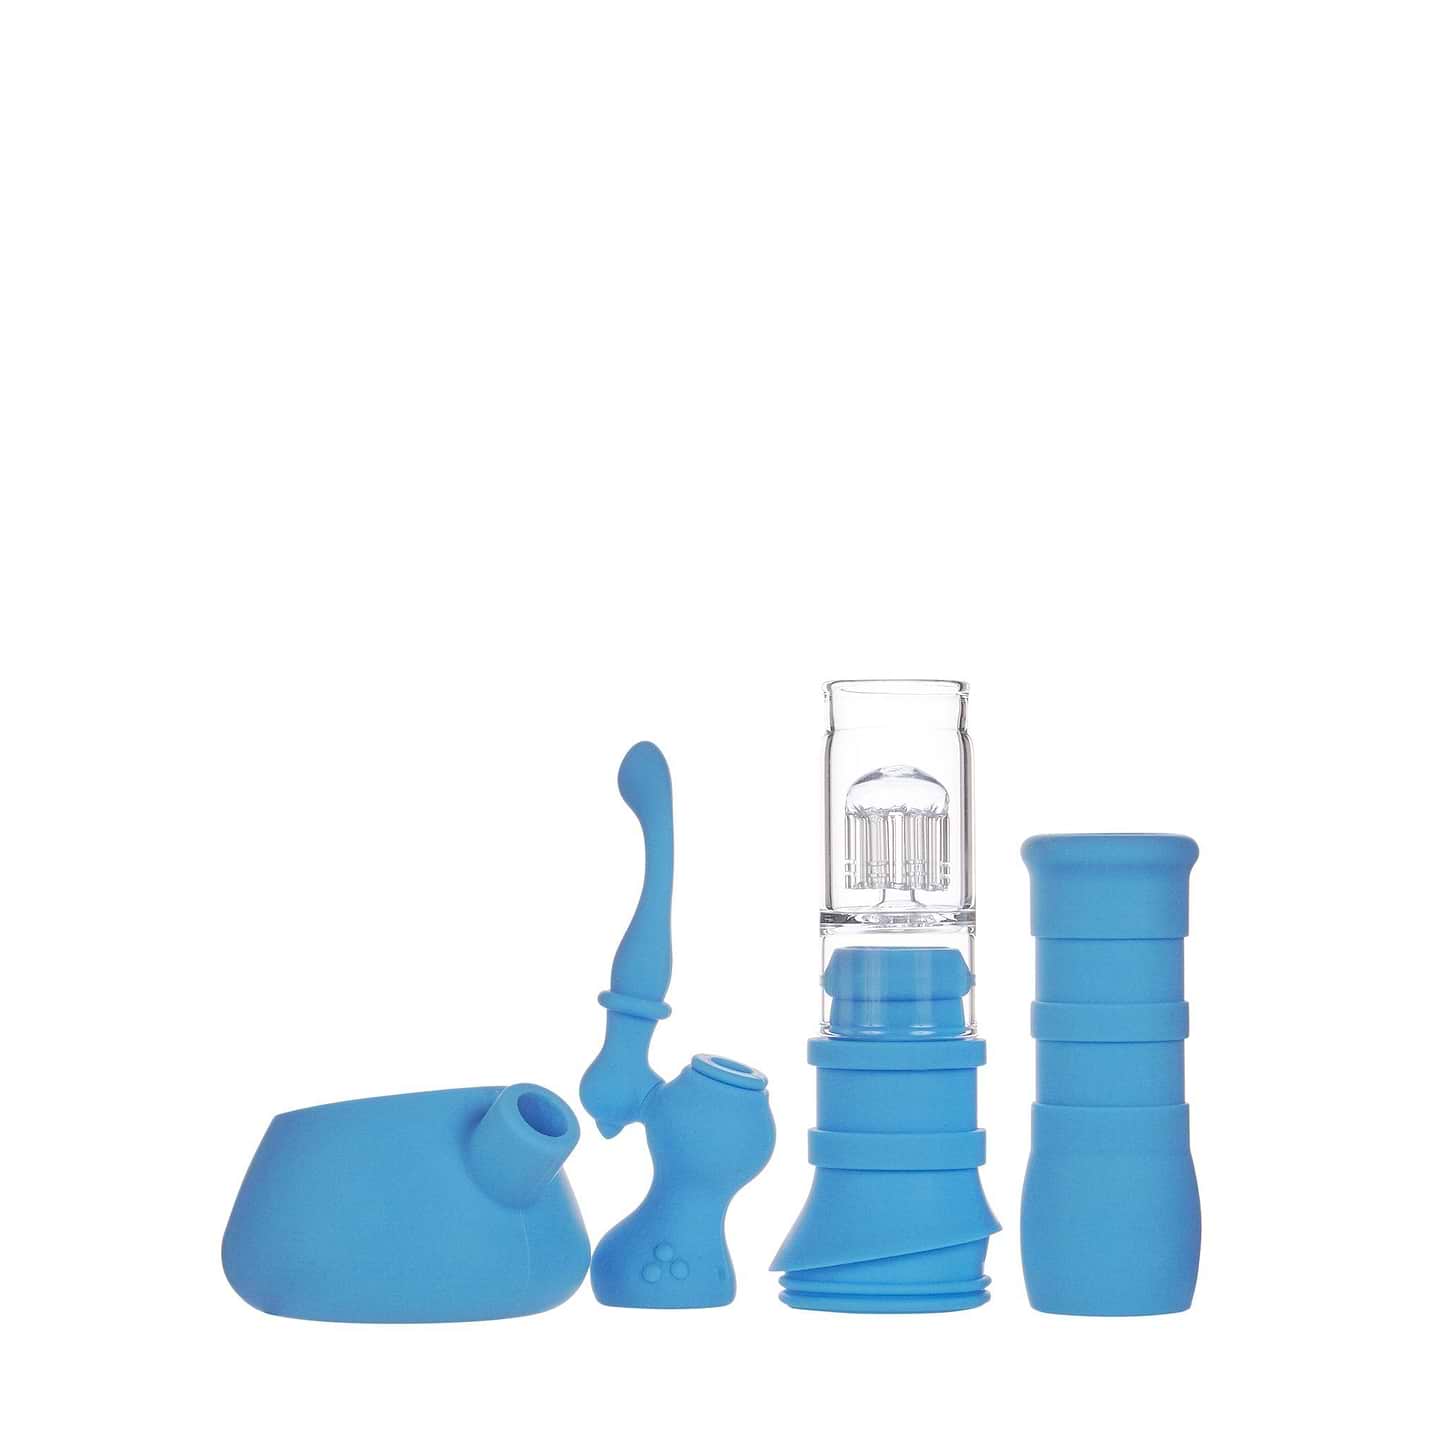 Cool 15-inch silicone bubbler bong smoking device detachable parts with a toy look